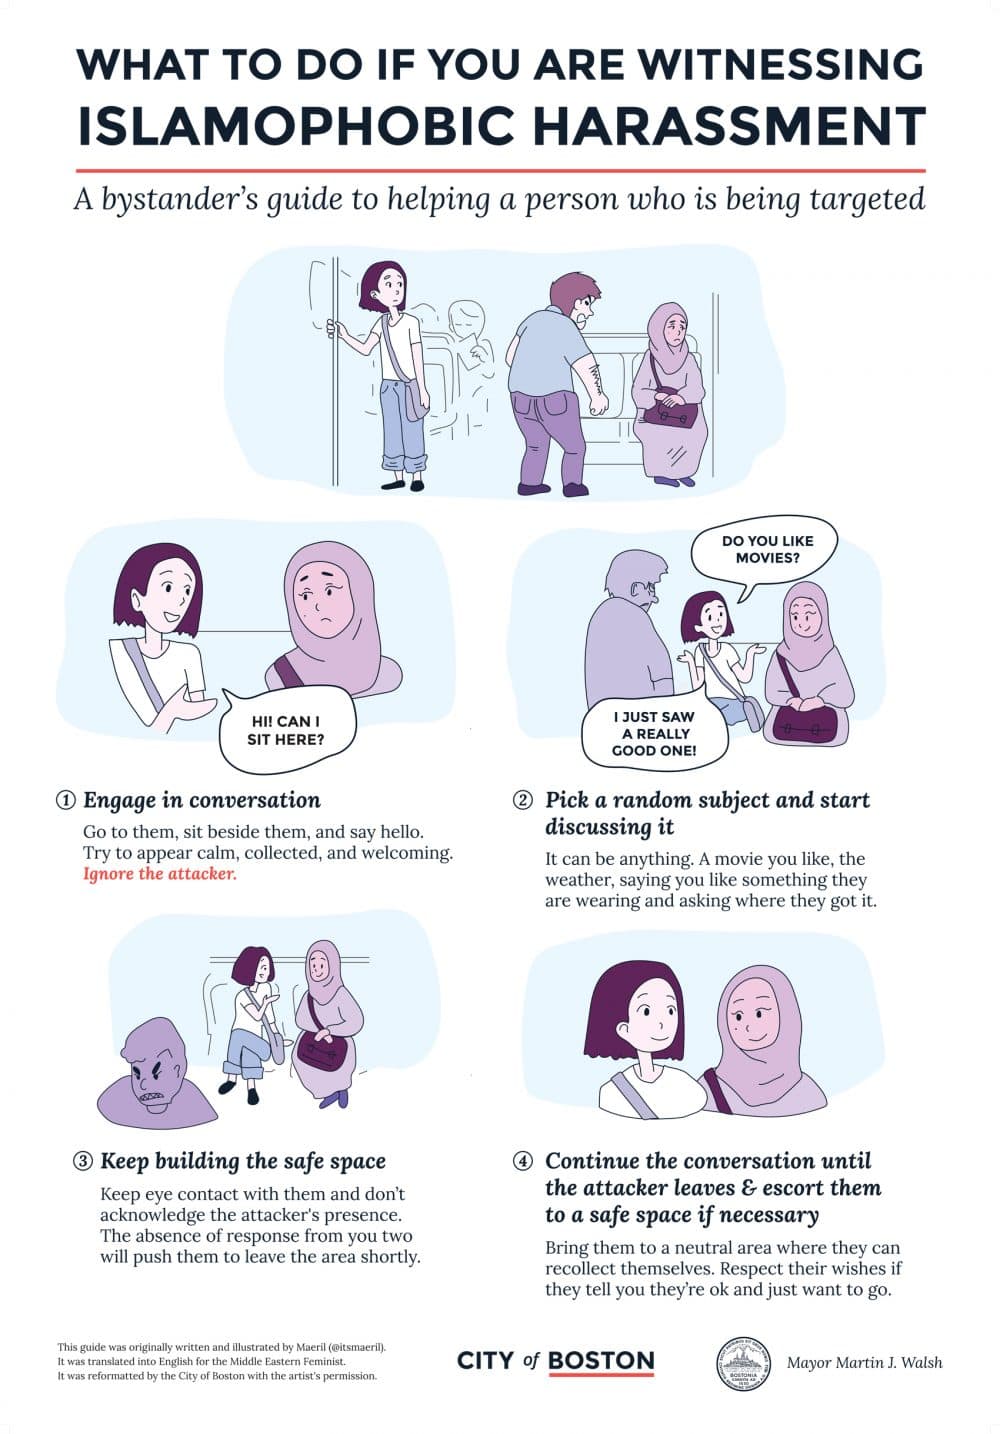 The poster instructing people on how to intervene during incidents of Islamophobic harassment. (Courtesy City of Boston)